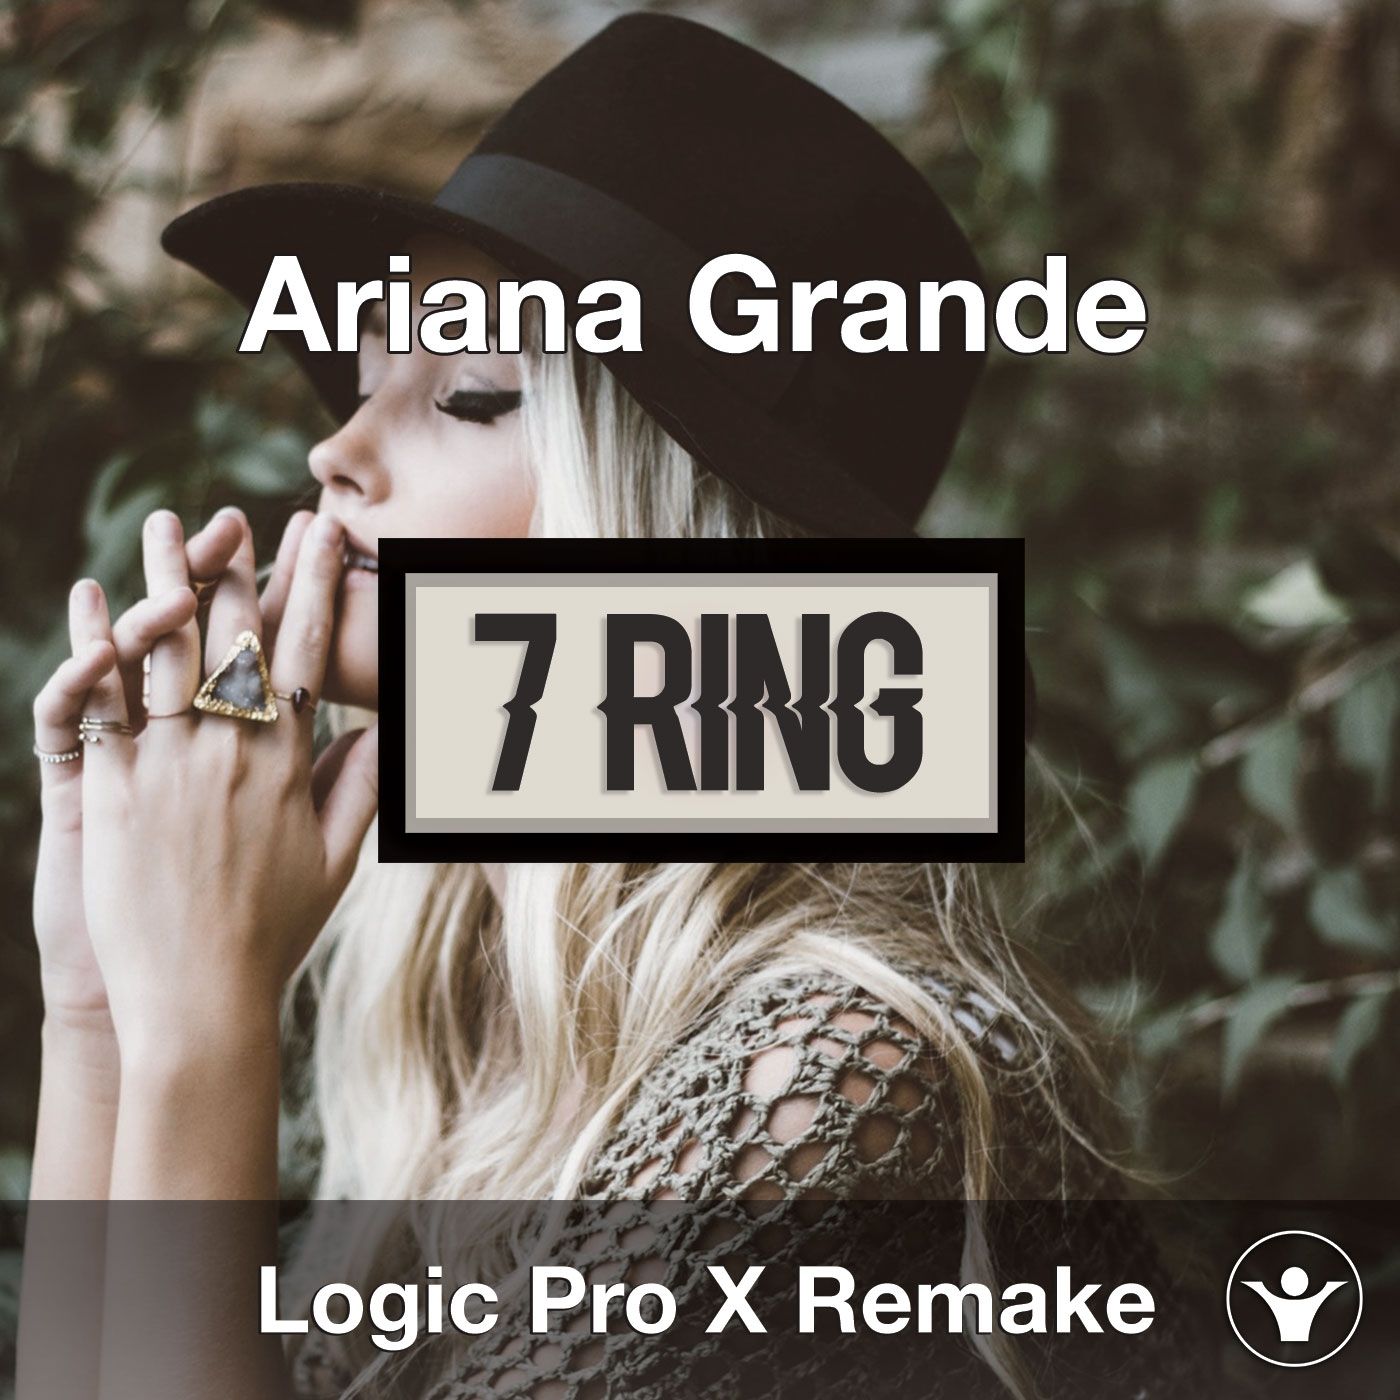 Listen to 7 Rings INSTRUMENTAL remake (Ariana Grande type beat) by Carl  Does Music in Hip-Hop/Rap/Trap MUSIC playlist online for free on SoundCloud